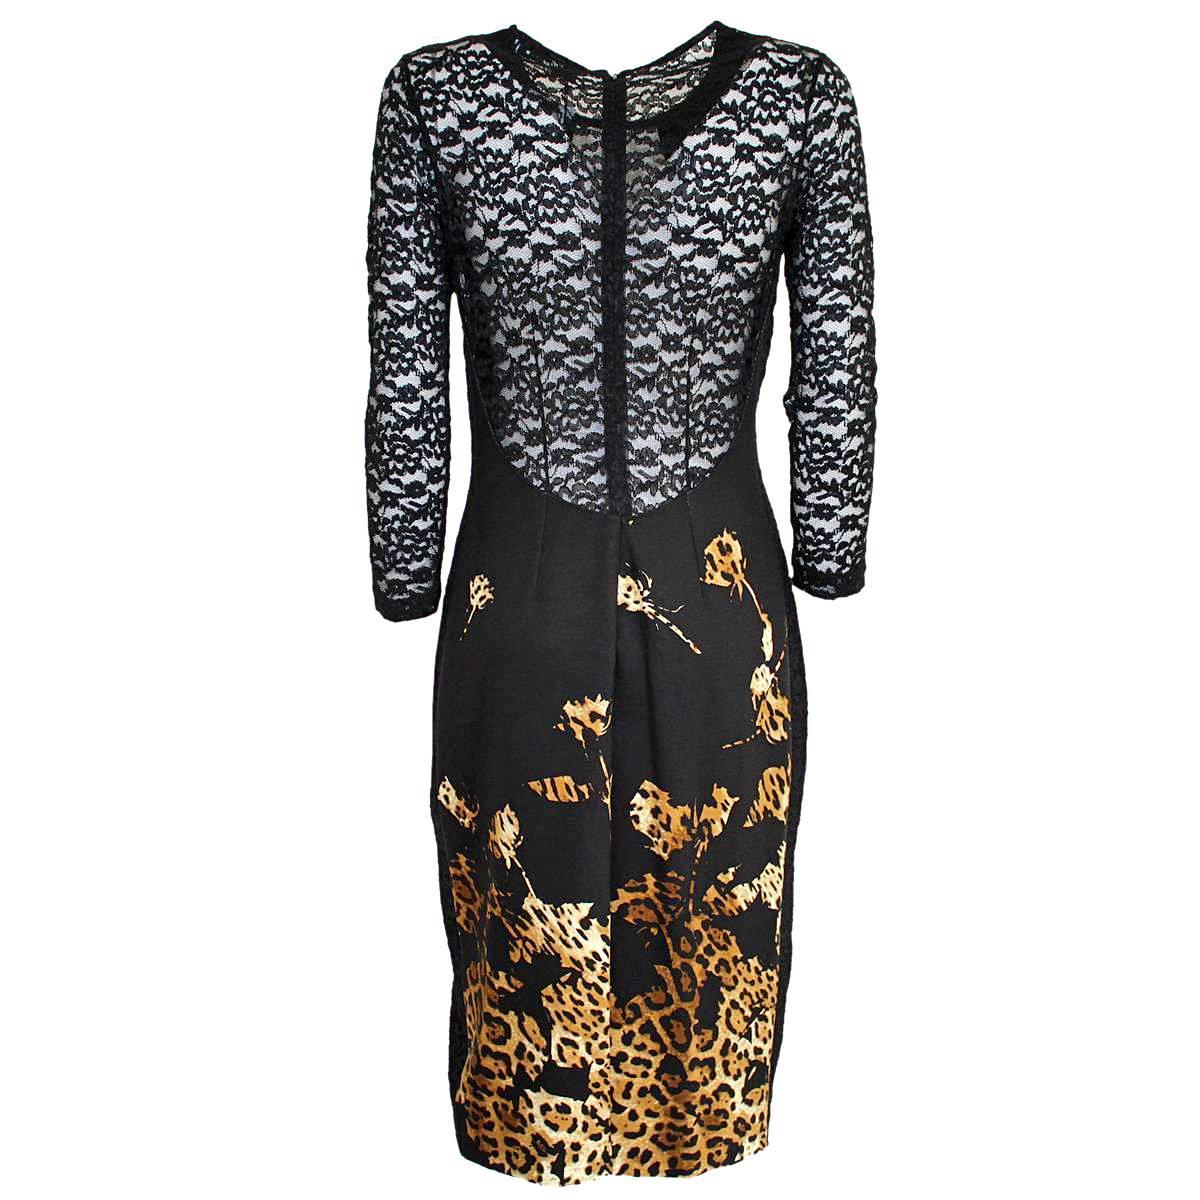 Beautiful brand new dress
Viscose (75%) and nylon
Amazing lace work on sleeves, back and hips
Black color
Animalier pattern on front
Long sleeve
Total lenght (shoulder/hem) cm 105 (41.3 inches)
Original price € 830
Made in Italy
Worldwide